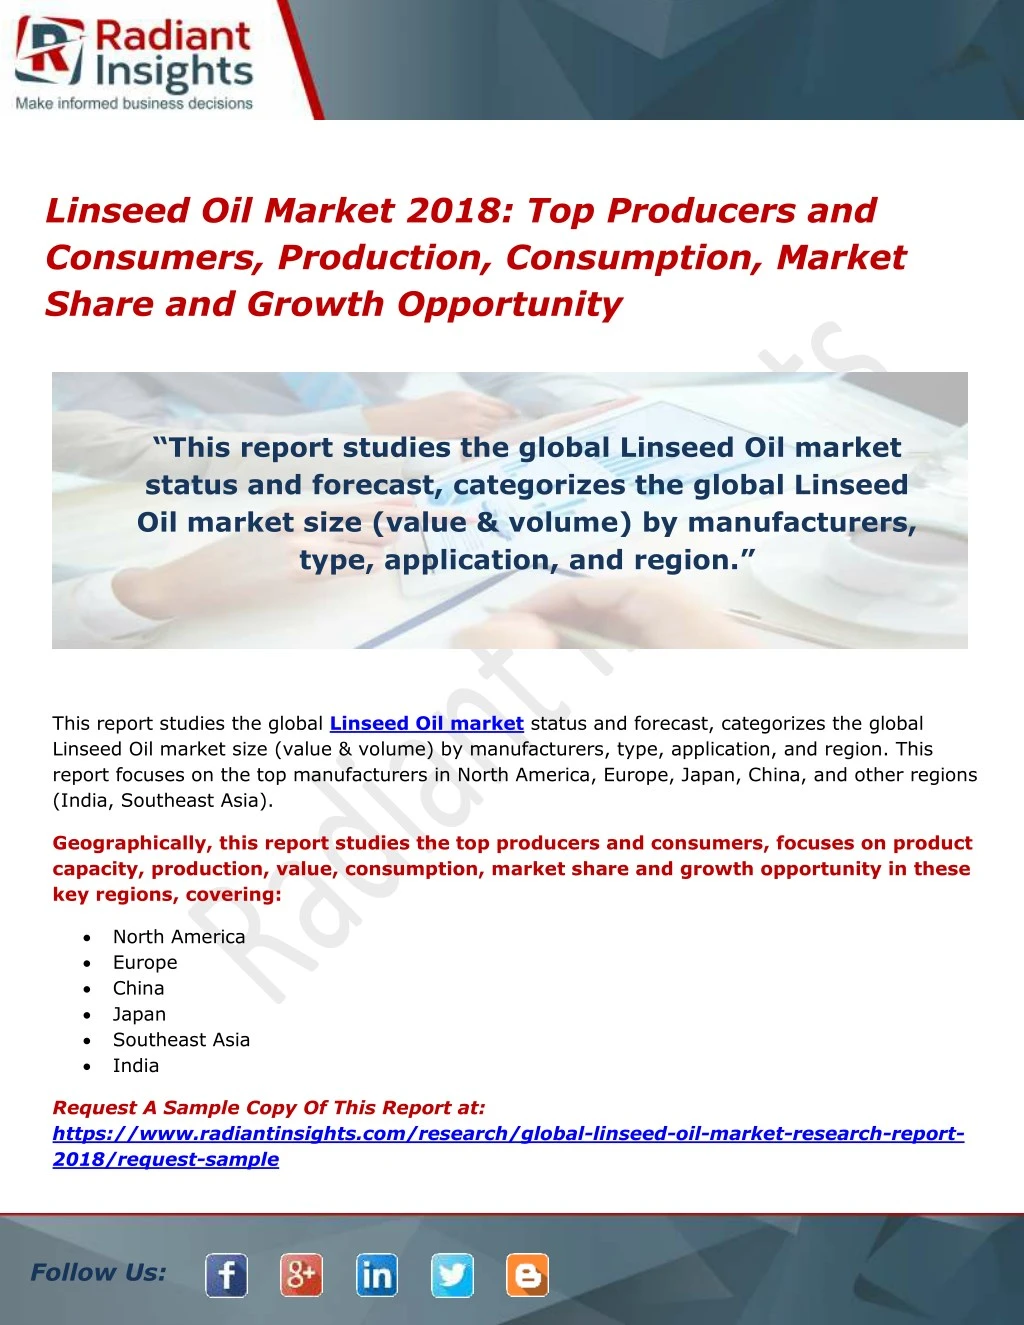 linseed oil market 2018 top producers